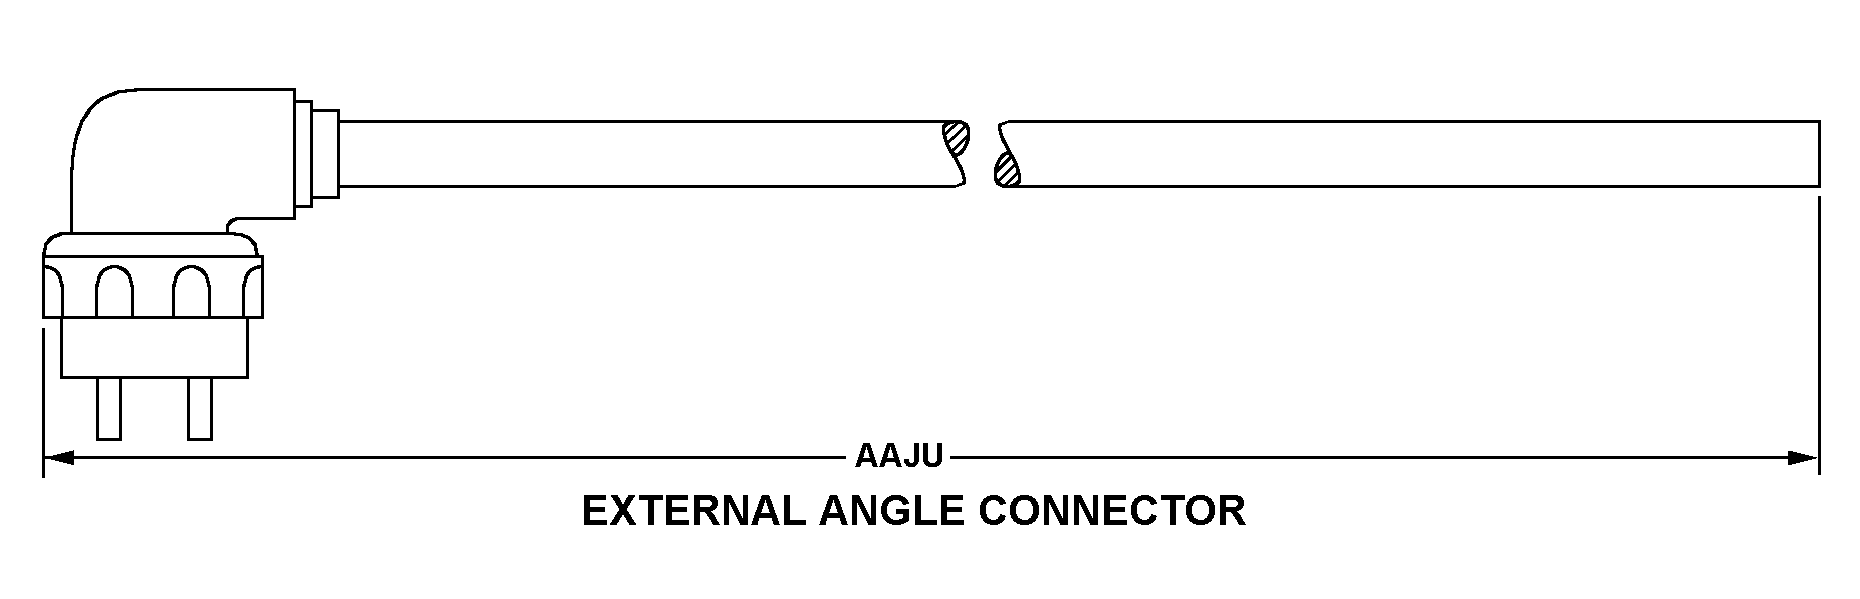 EXTERNAL ANGLE CONNECTOR style nsn 6150-01-266-8677